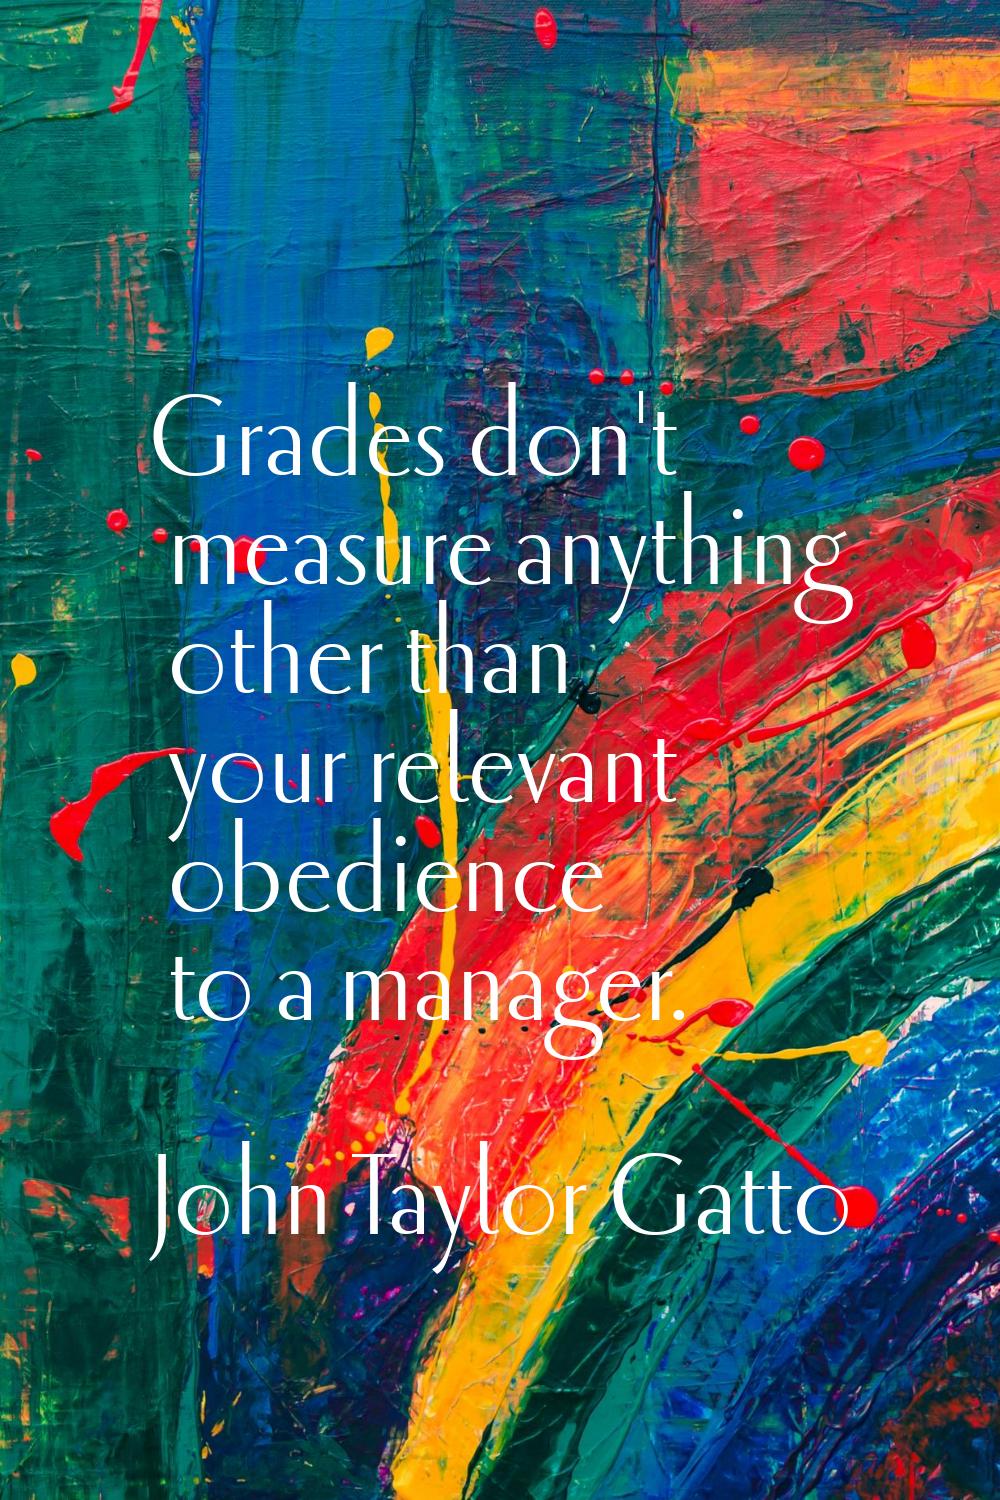 Grades don't measure anything other than your relevant obedience to a manager.